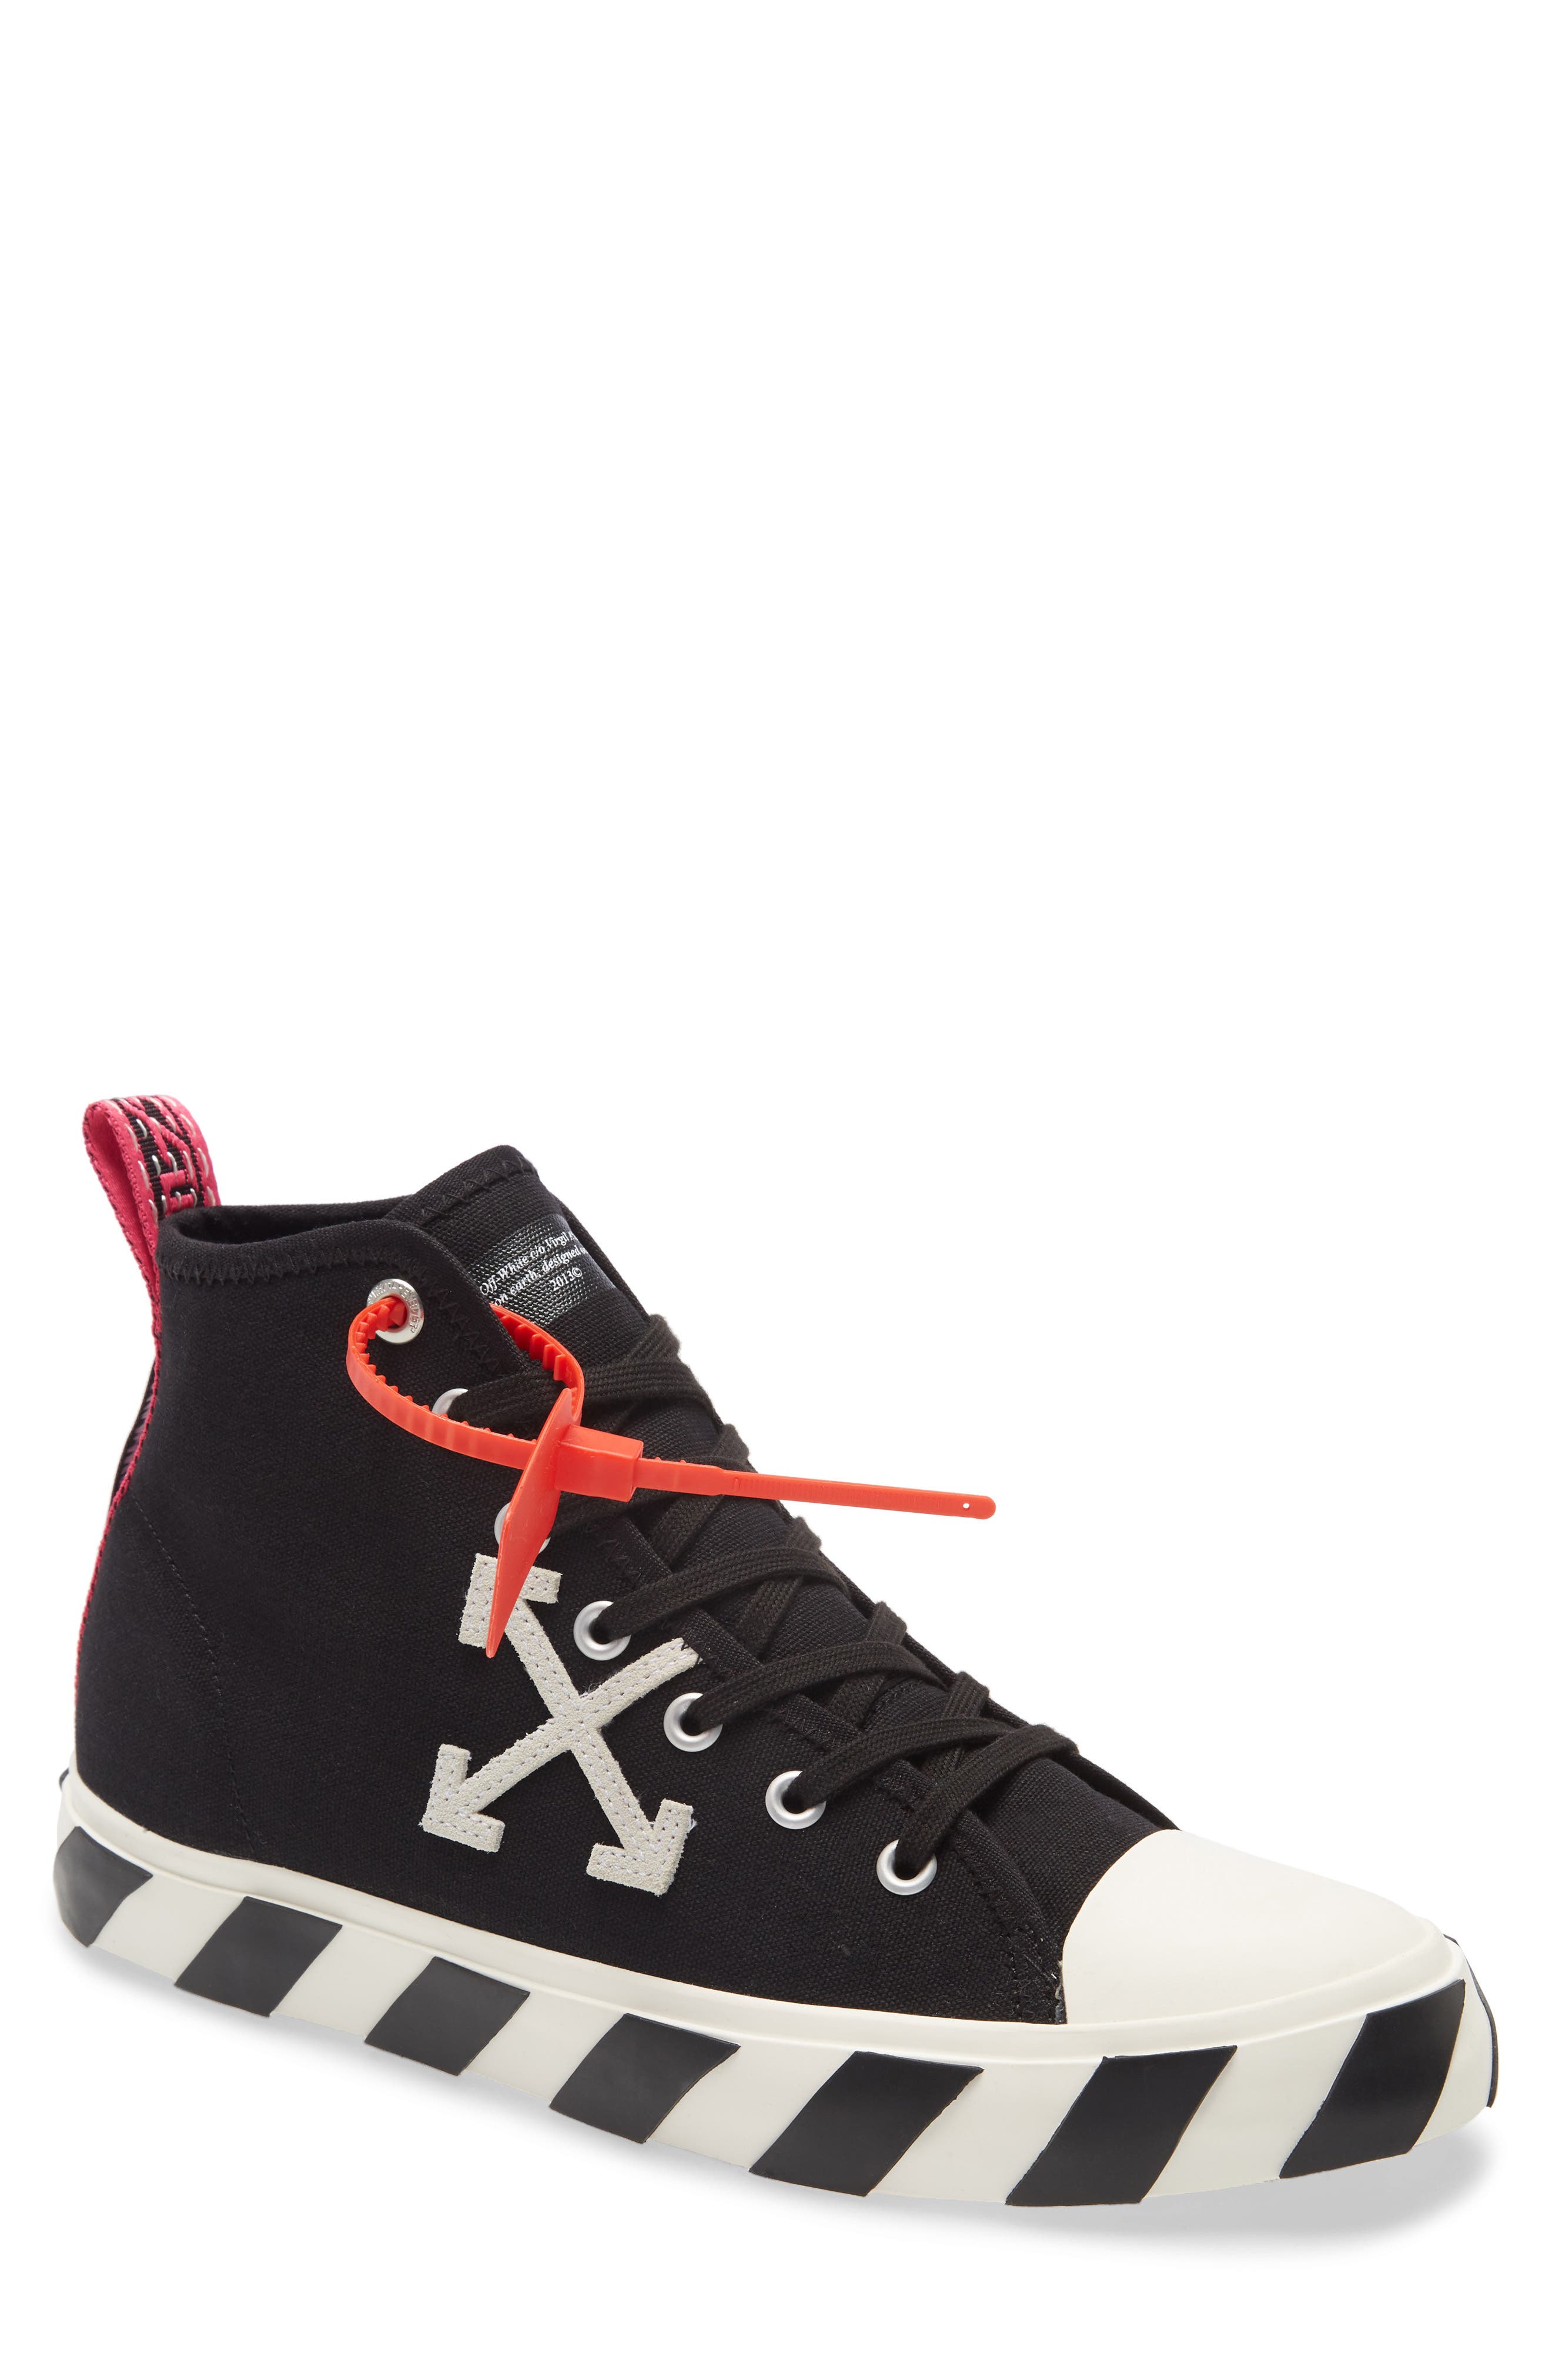 off white mid top sneaker